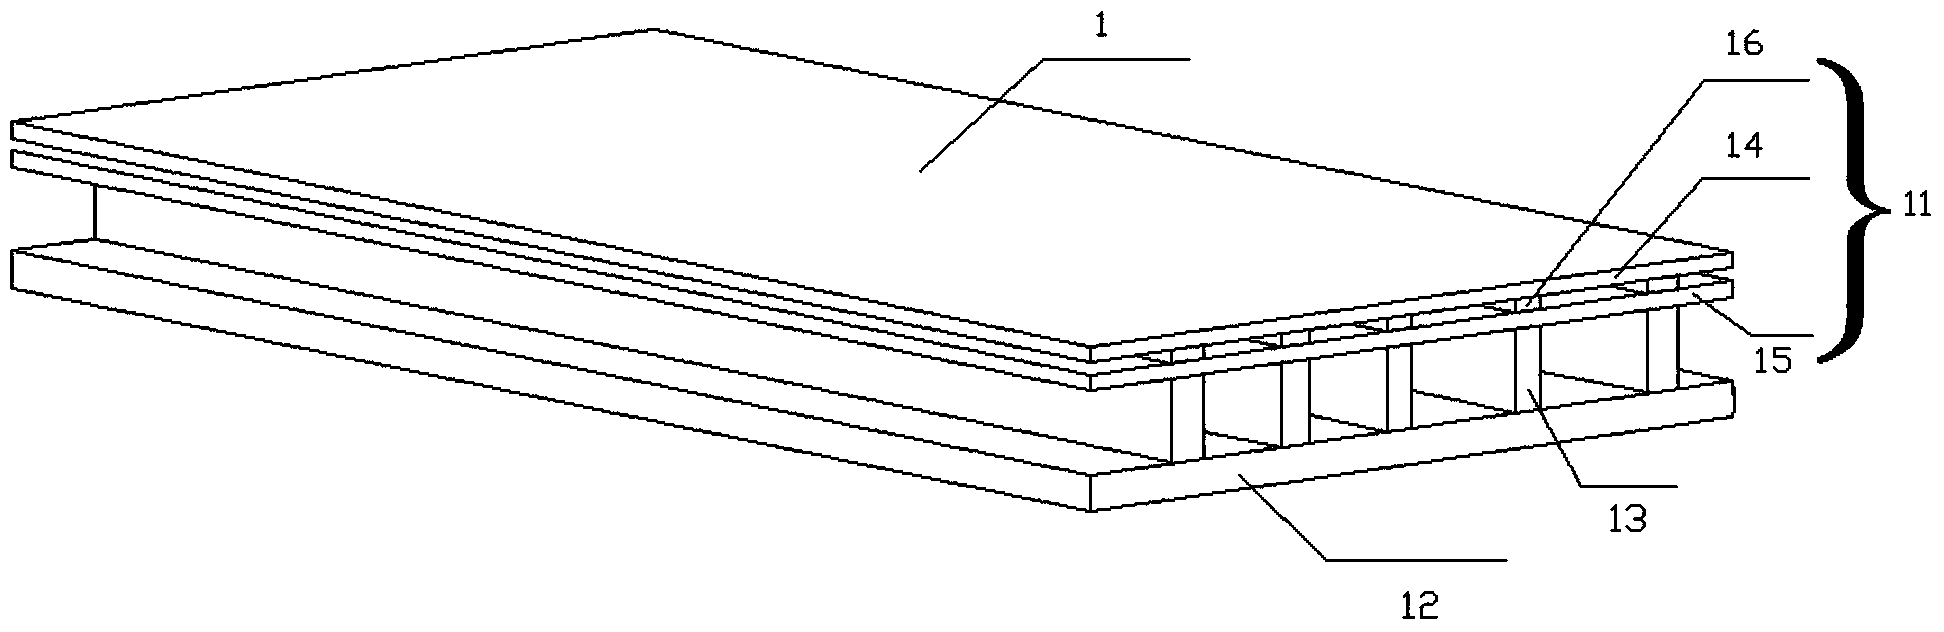 Door and window sleeve capable of cut and closed up